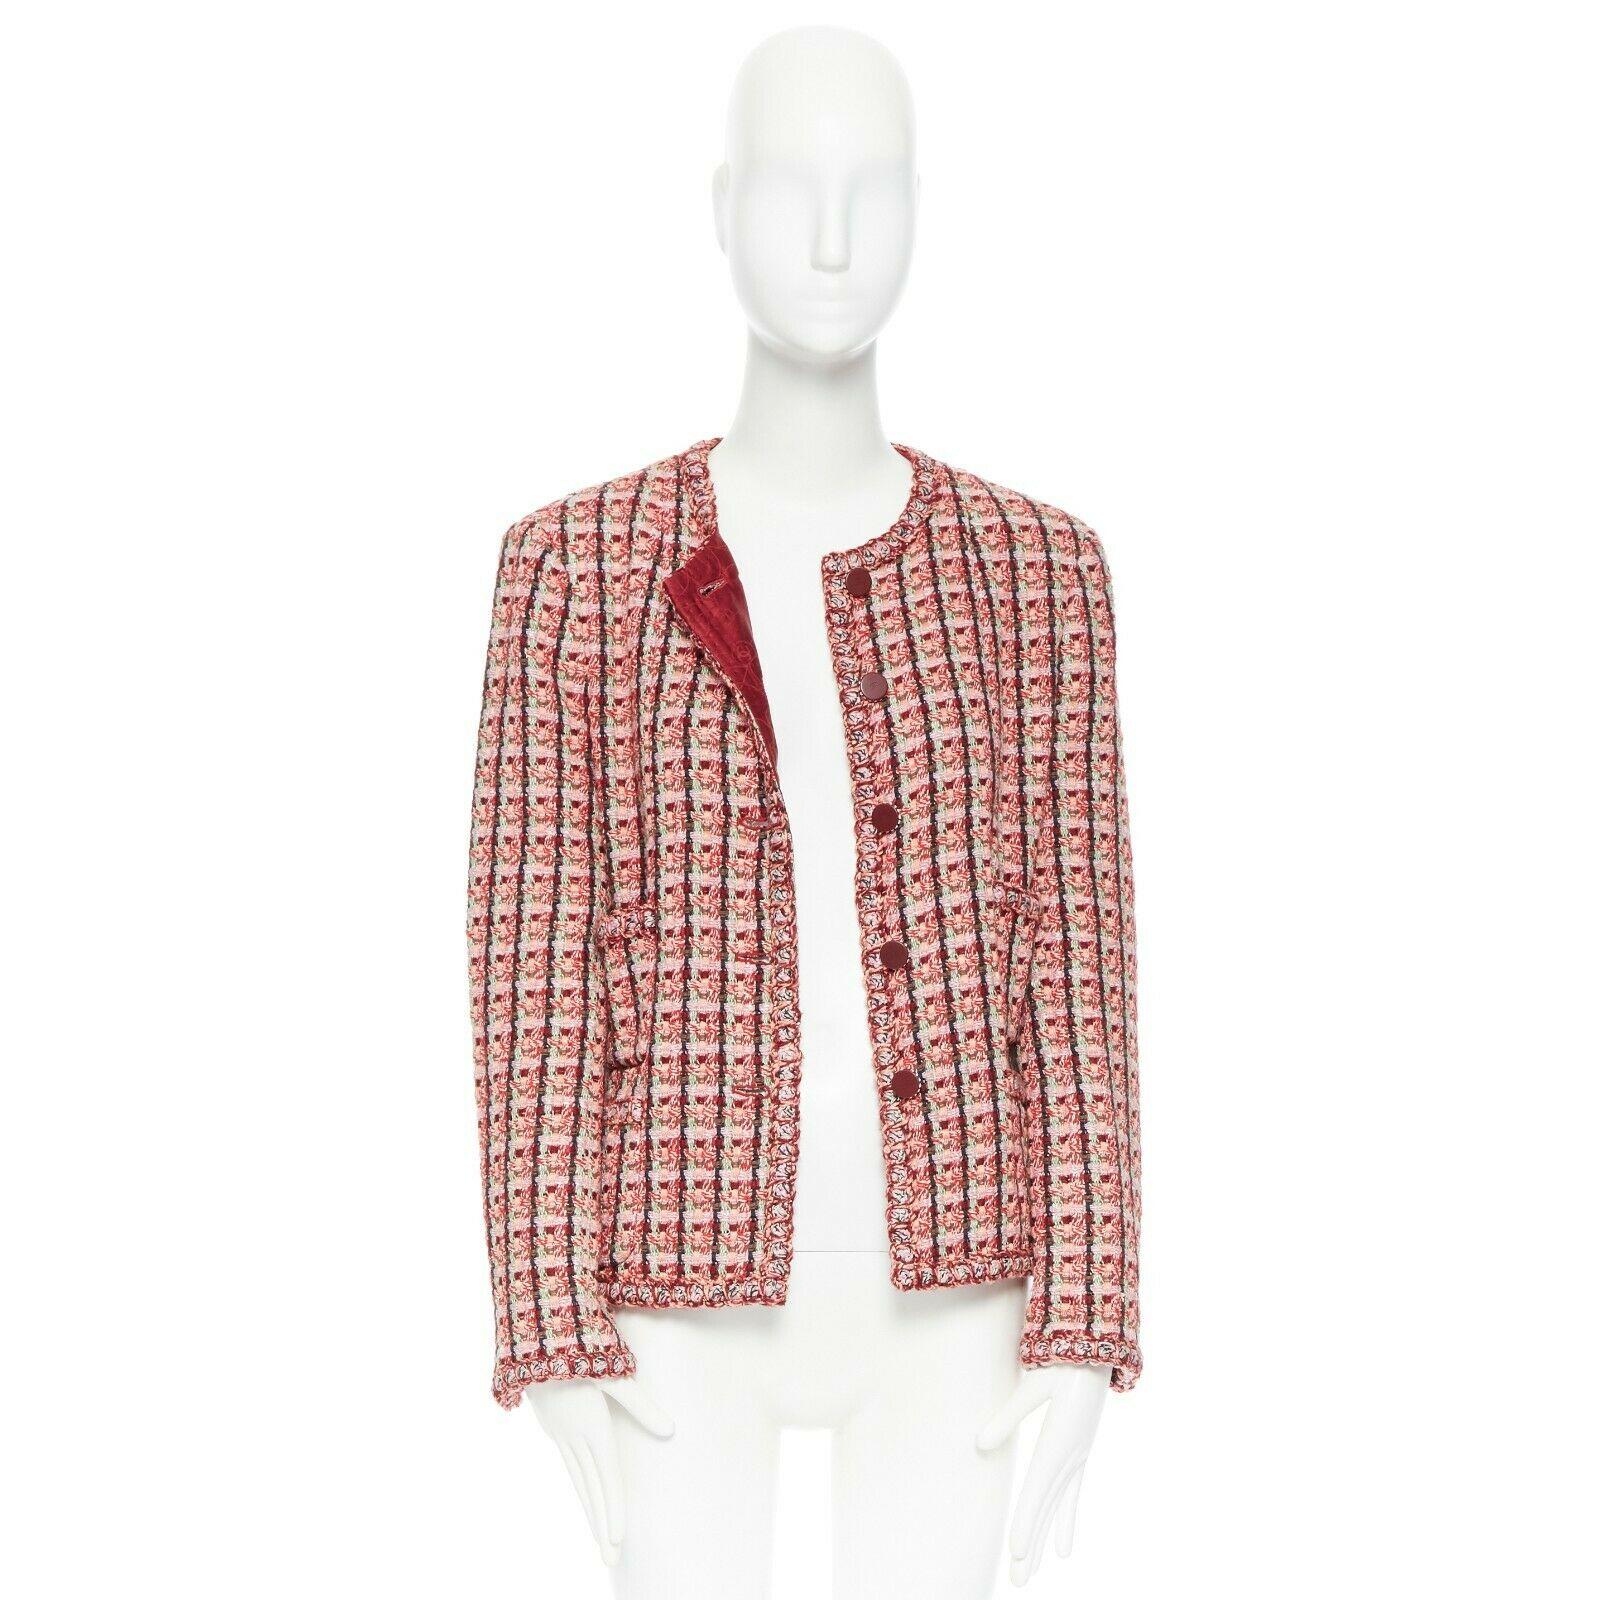 CHANEL 02P vintage multicolour pink green red tweed check 4 pocket jacket FR44
Brand: CHANEL
Designer: Karl Lagerfeld
Collection: 02P
Model Name / Style: Tweed jacket
Material: Acrylic and cotton
Color: Multicolour
Pattern: Check
Closure: